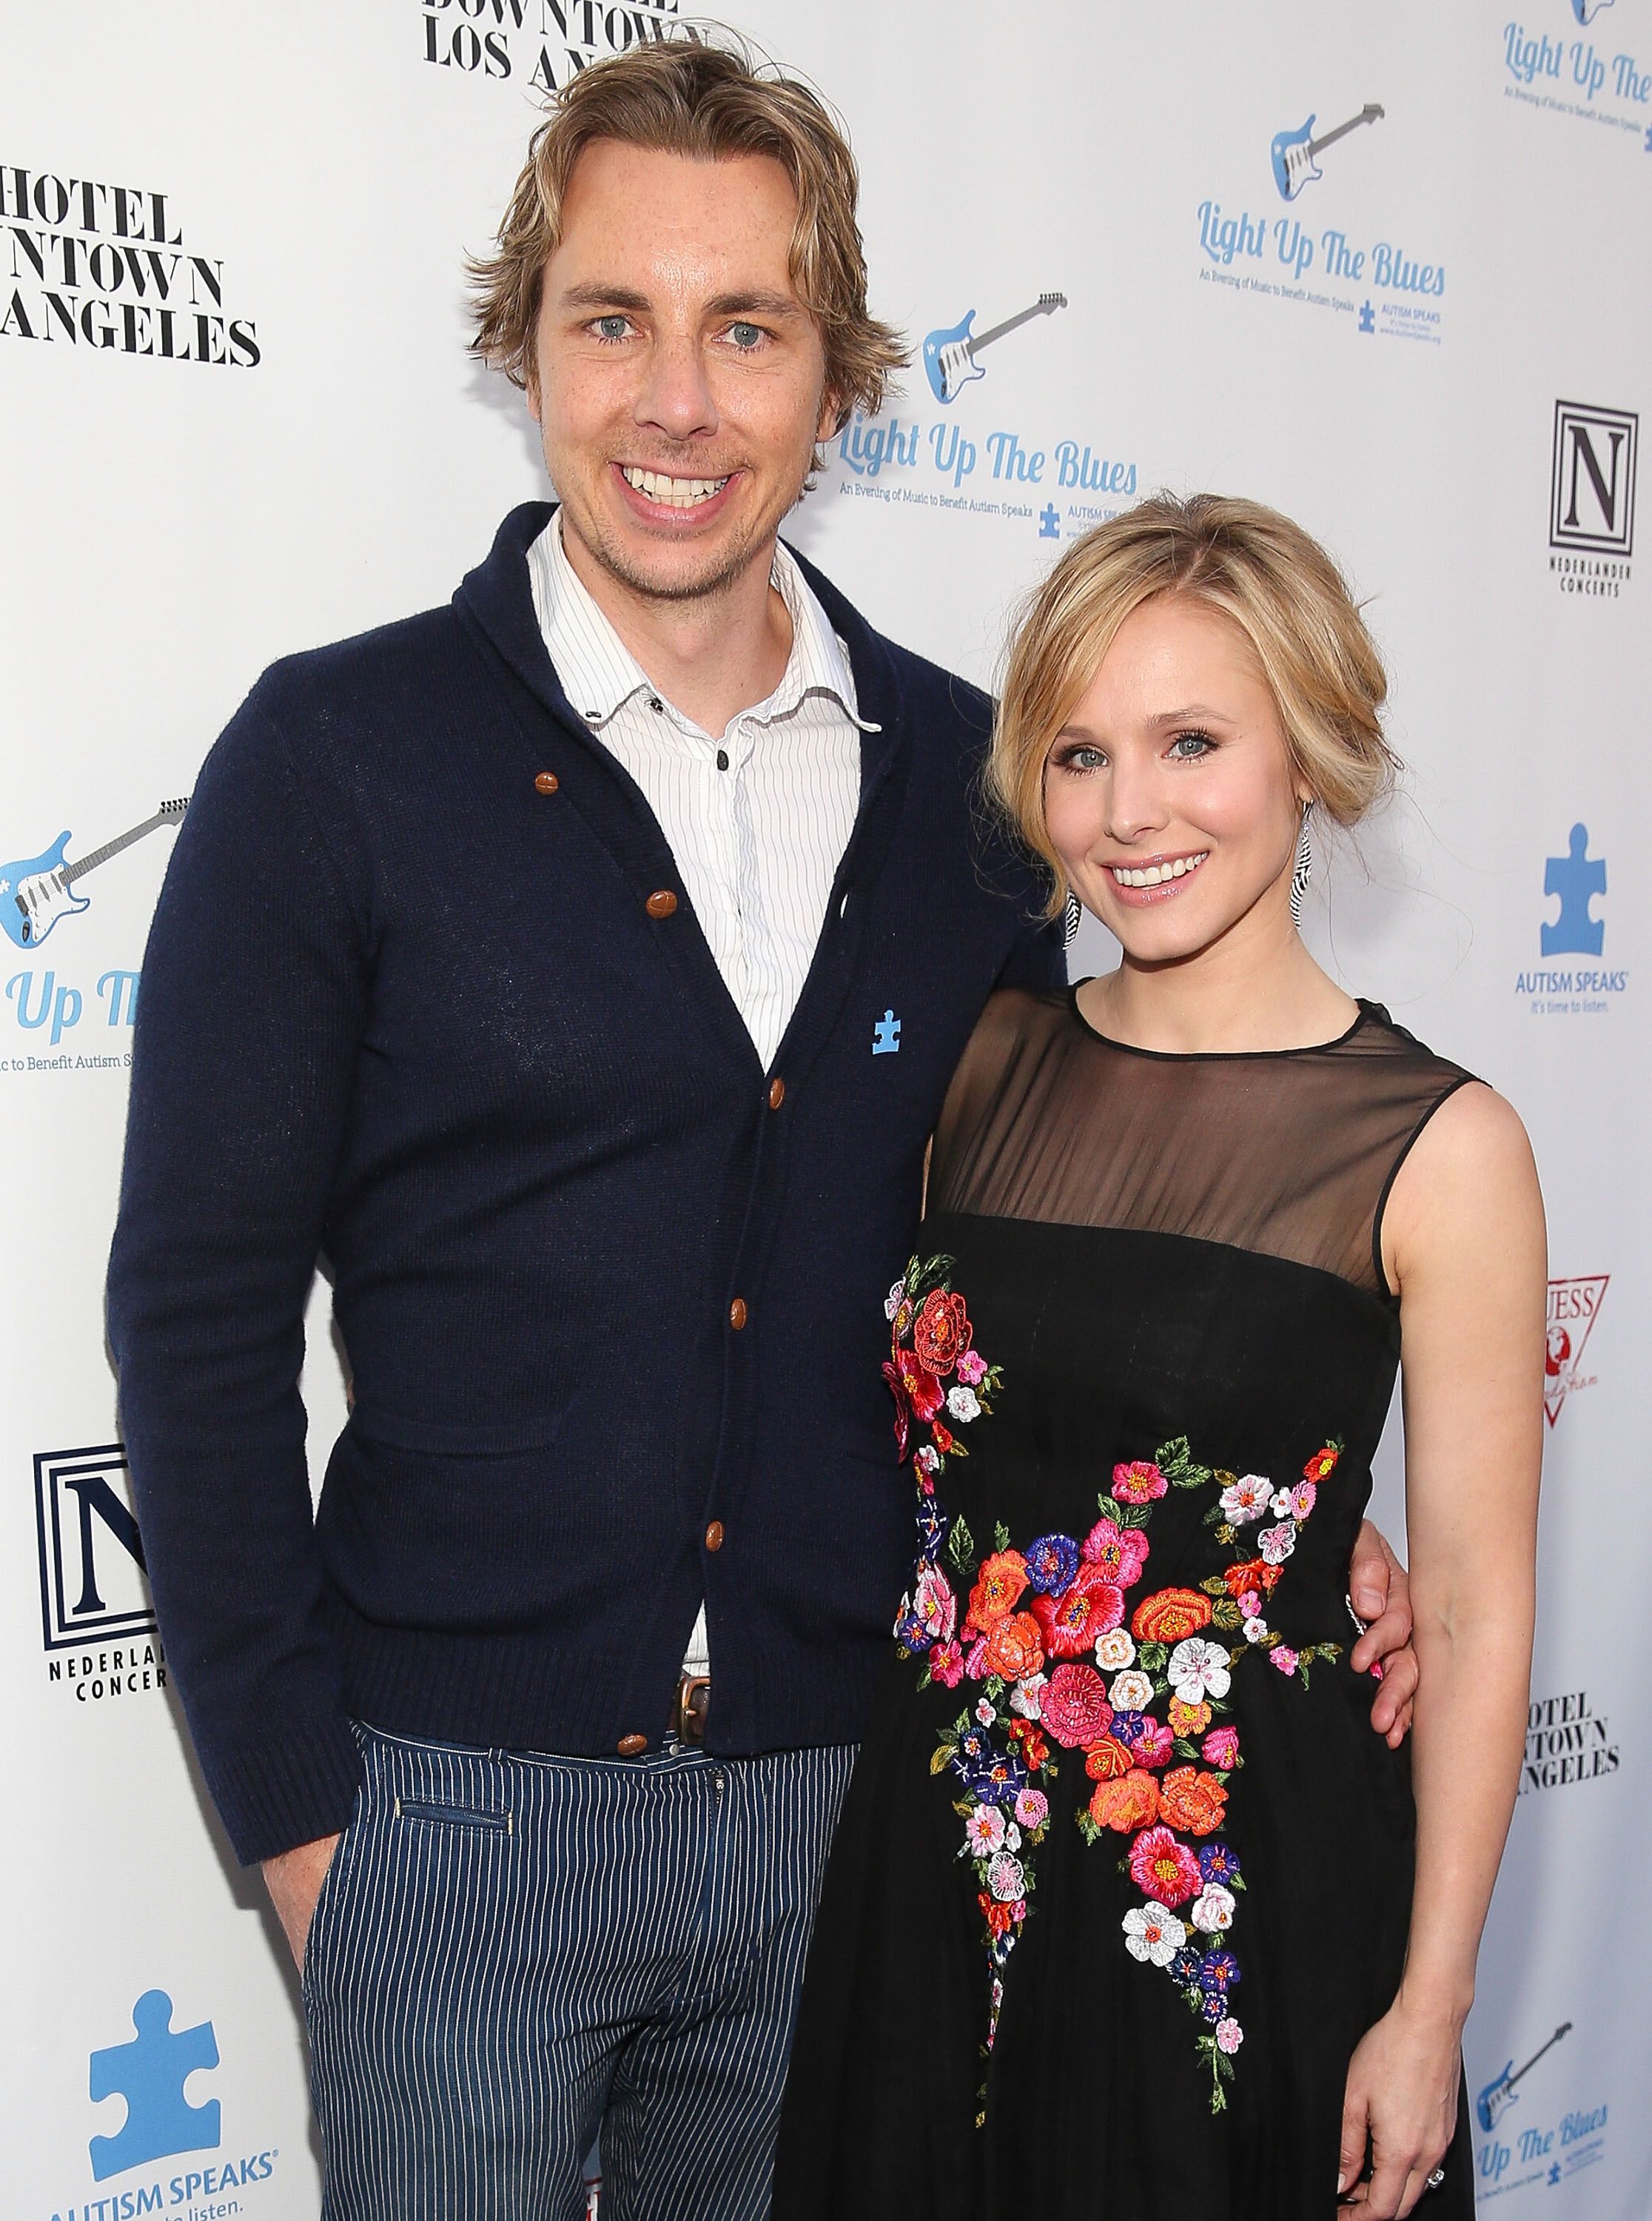 Dax Shepard and Kristen Bell at the 2nd Light Up The Blues Concert - An Evening Of Music To Benefit Autism Speaks on April 5, 2014, in Los Angeles, California | Photo: Imeh Akpanudosen/Getty Images